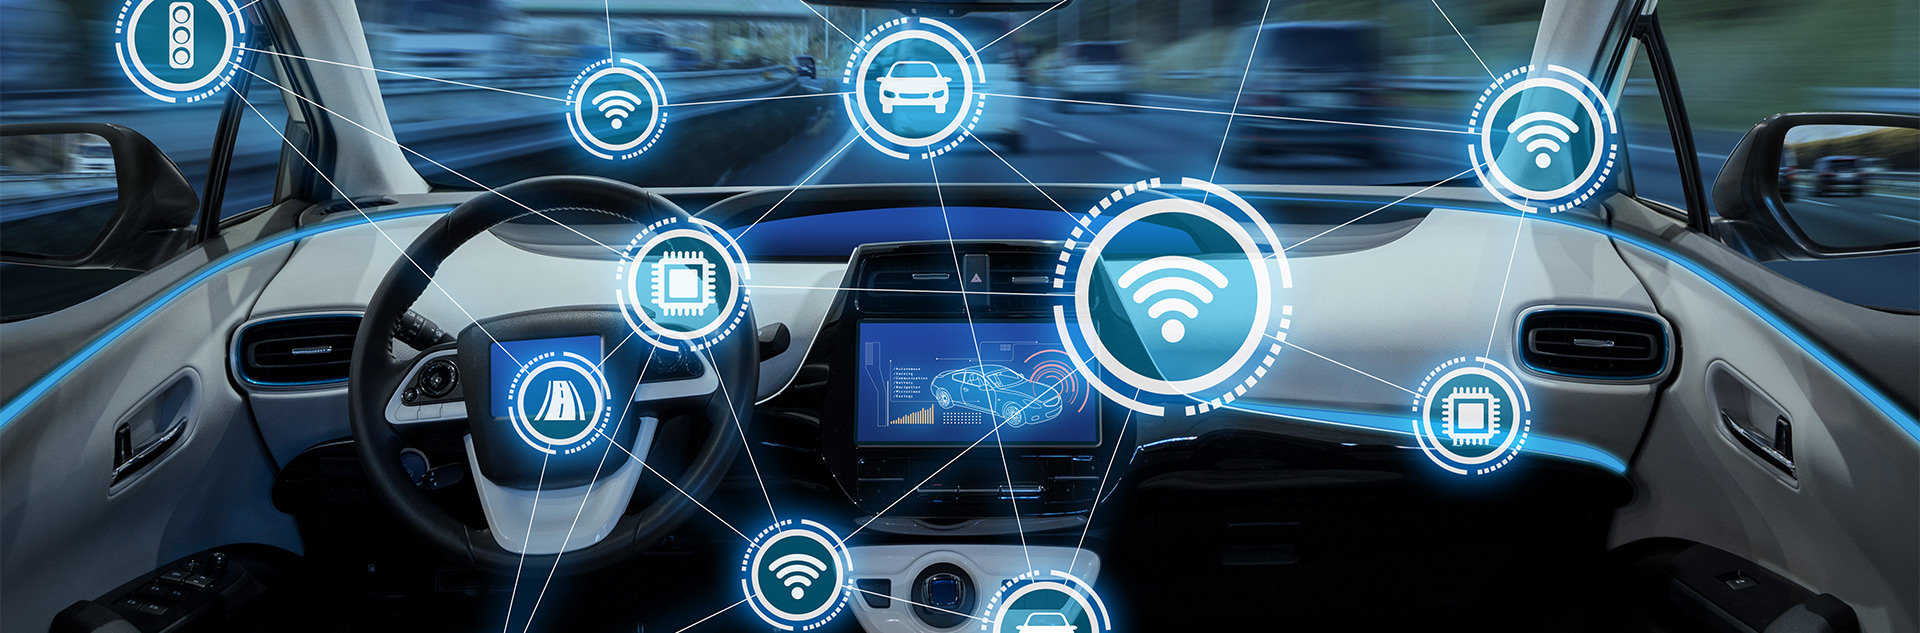 PCI Express in Automotive Applications